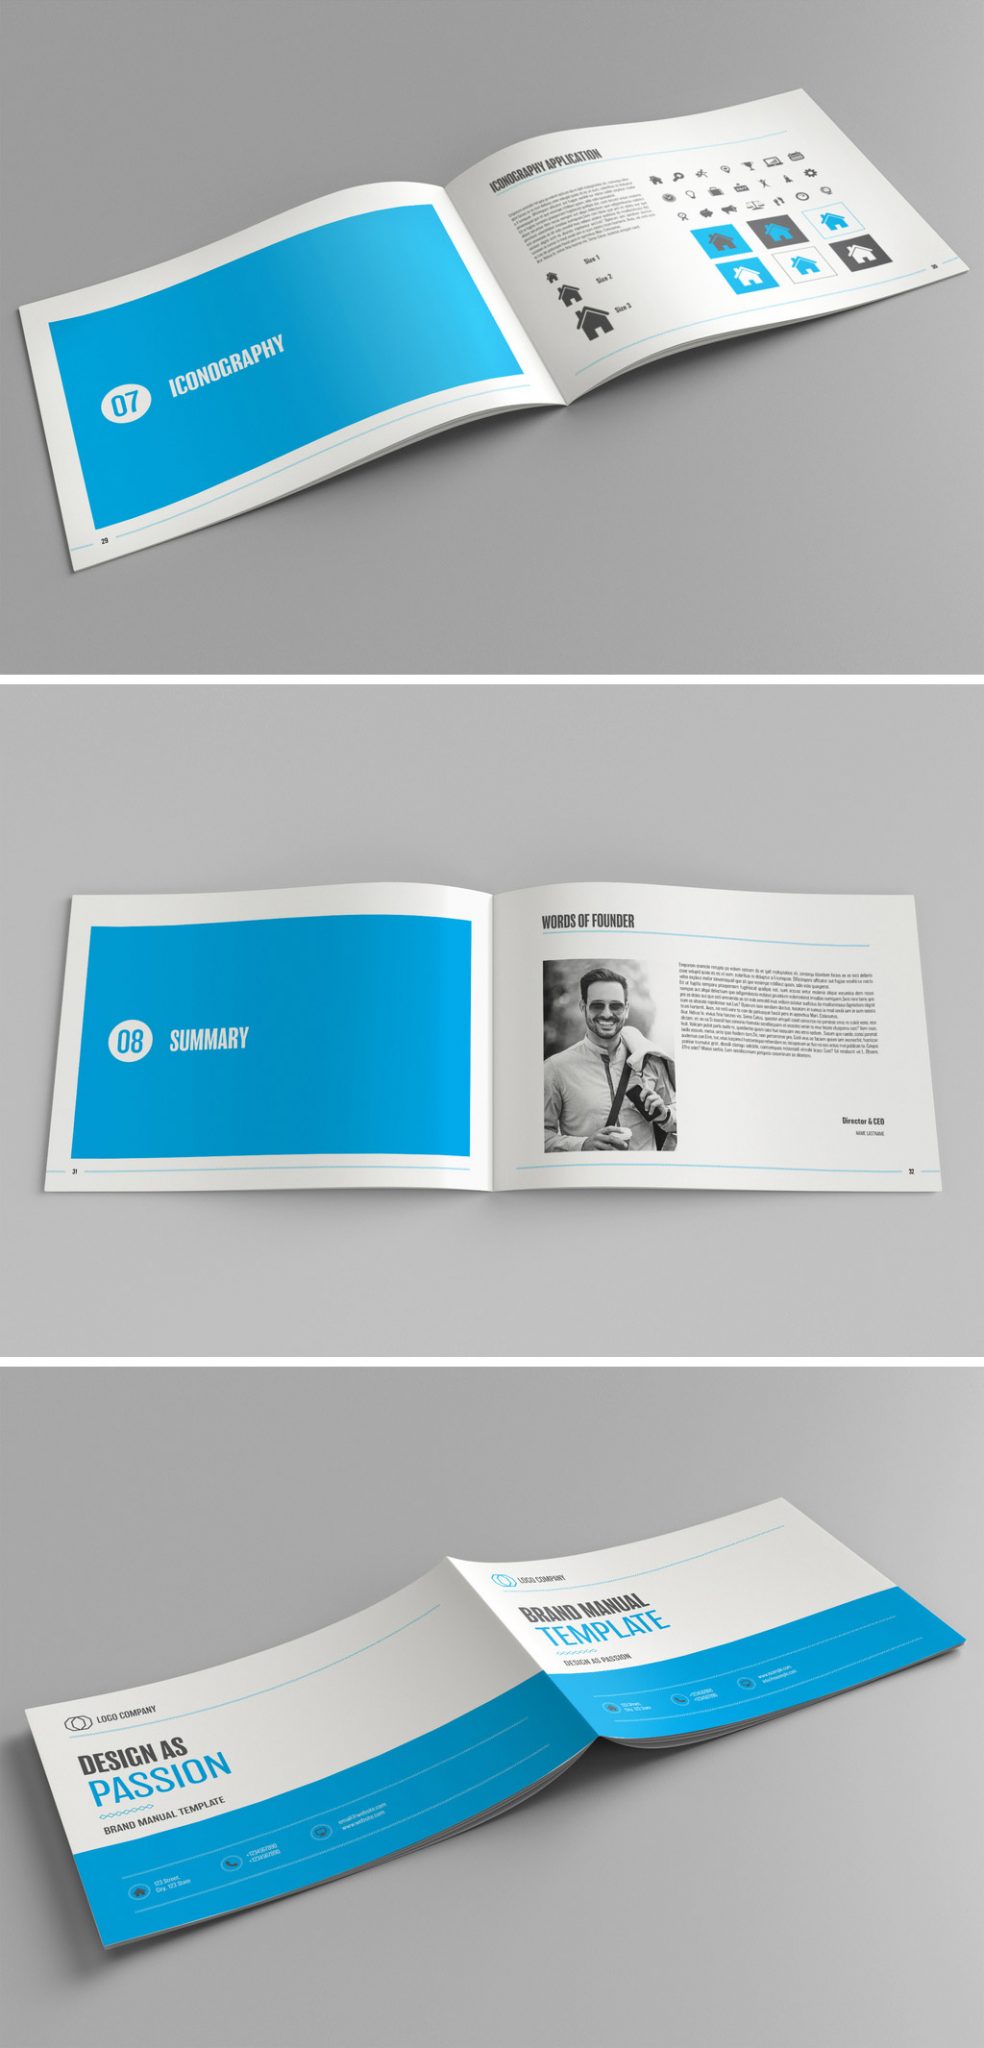 Brand Manual amp Style Guide Template for Adobe InDesign